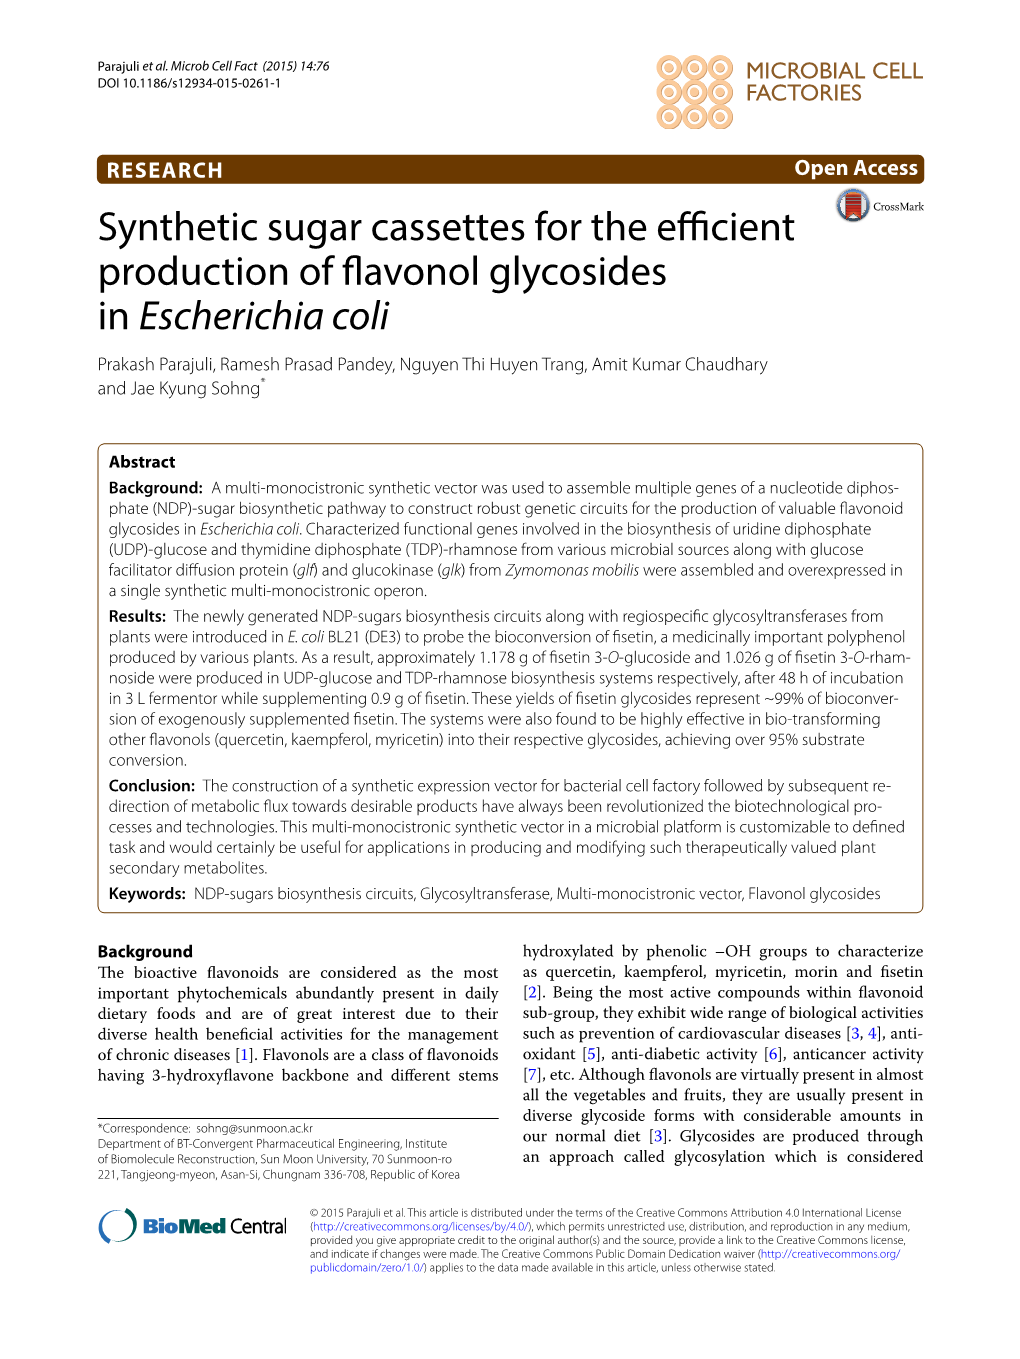 Synthetic Sugar Cassettes for the Efficient Production of Flavonol